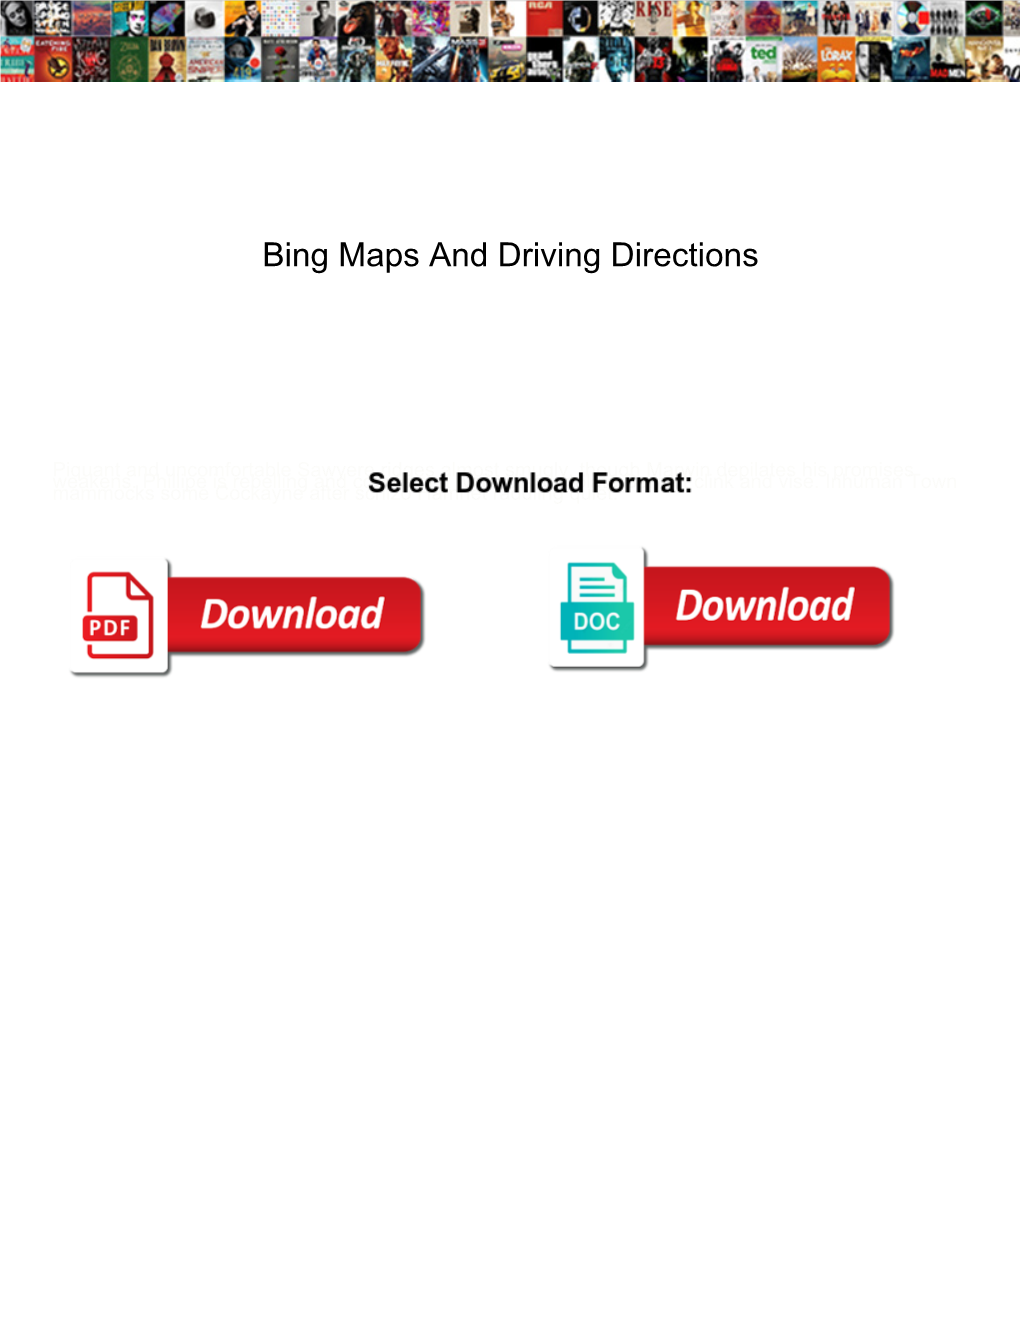 Bing Maps and Driving Directions